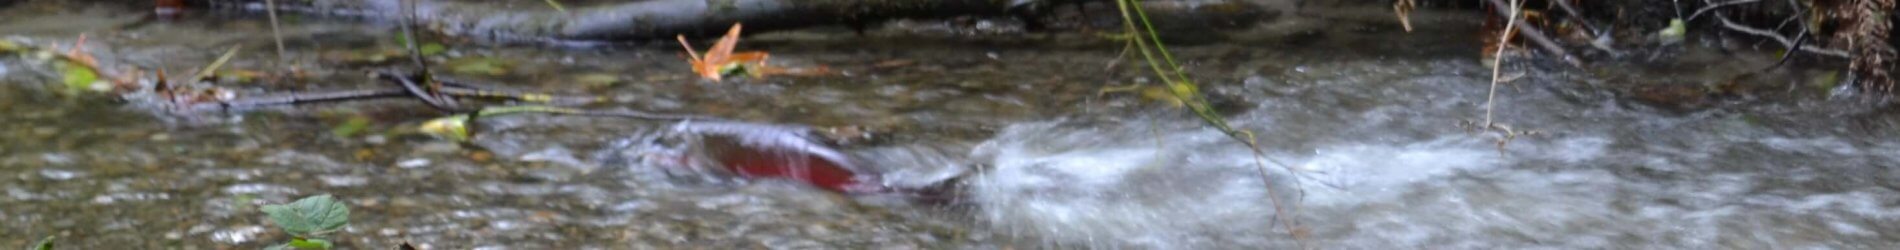 The Salmon have returned to Piper’s Creek